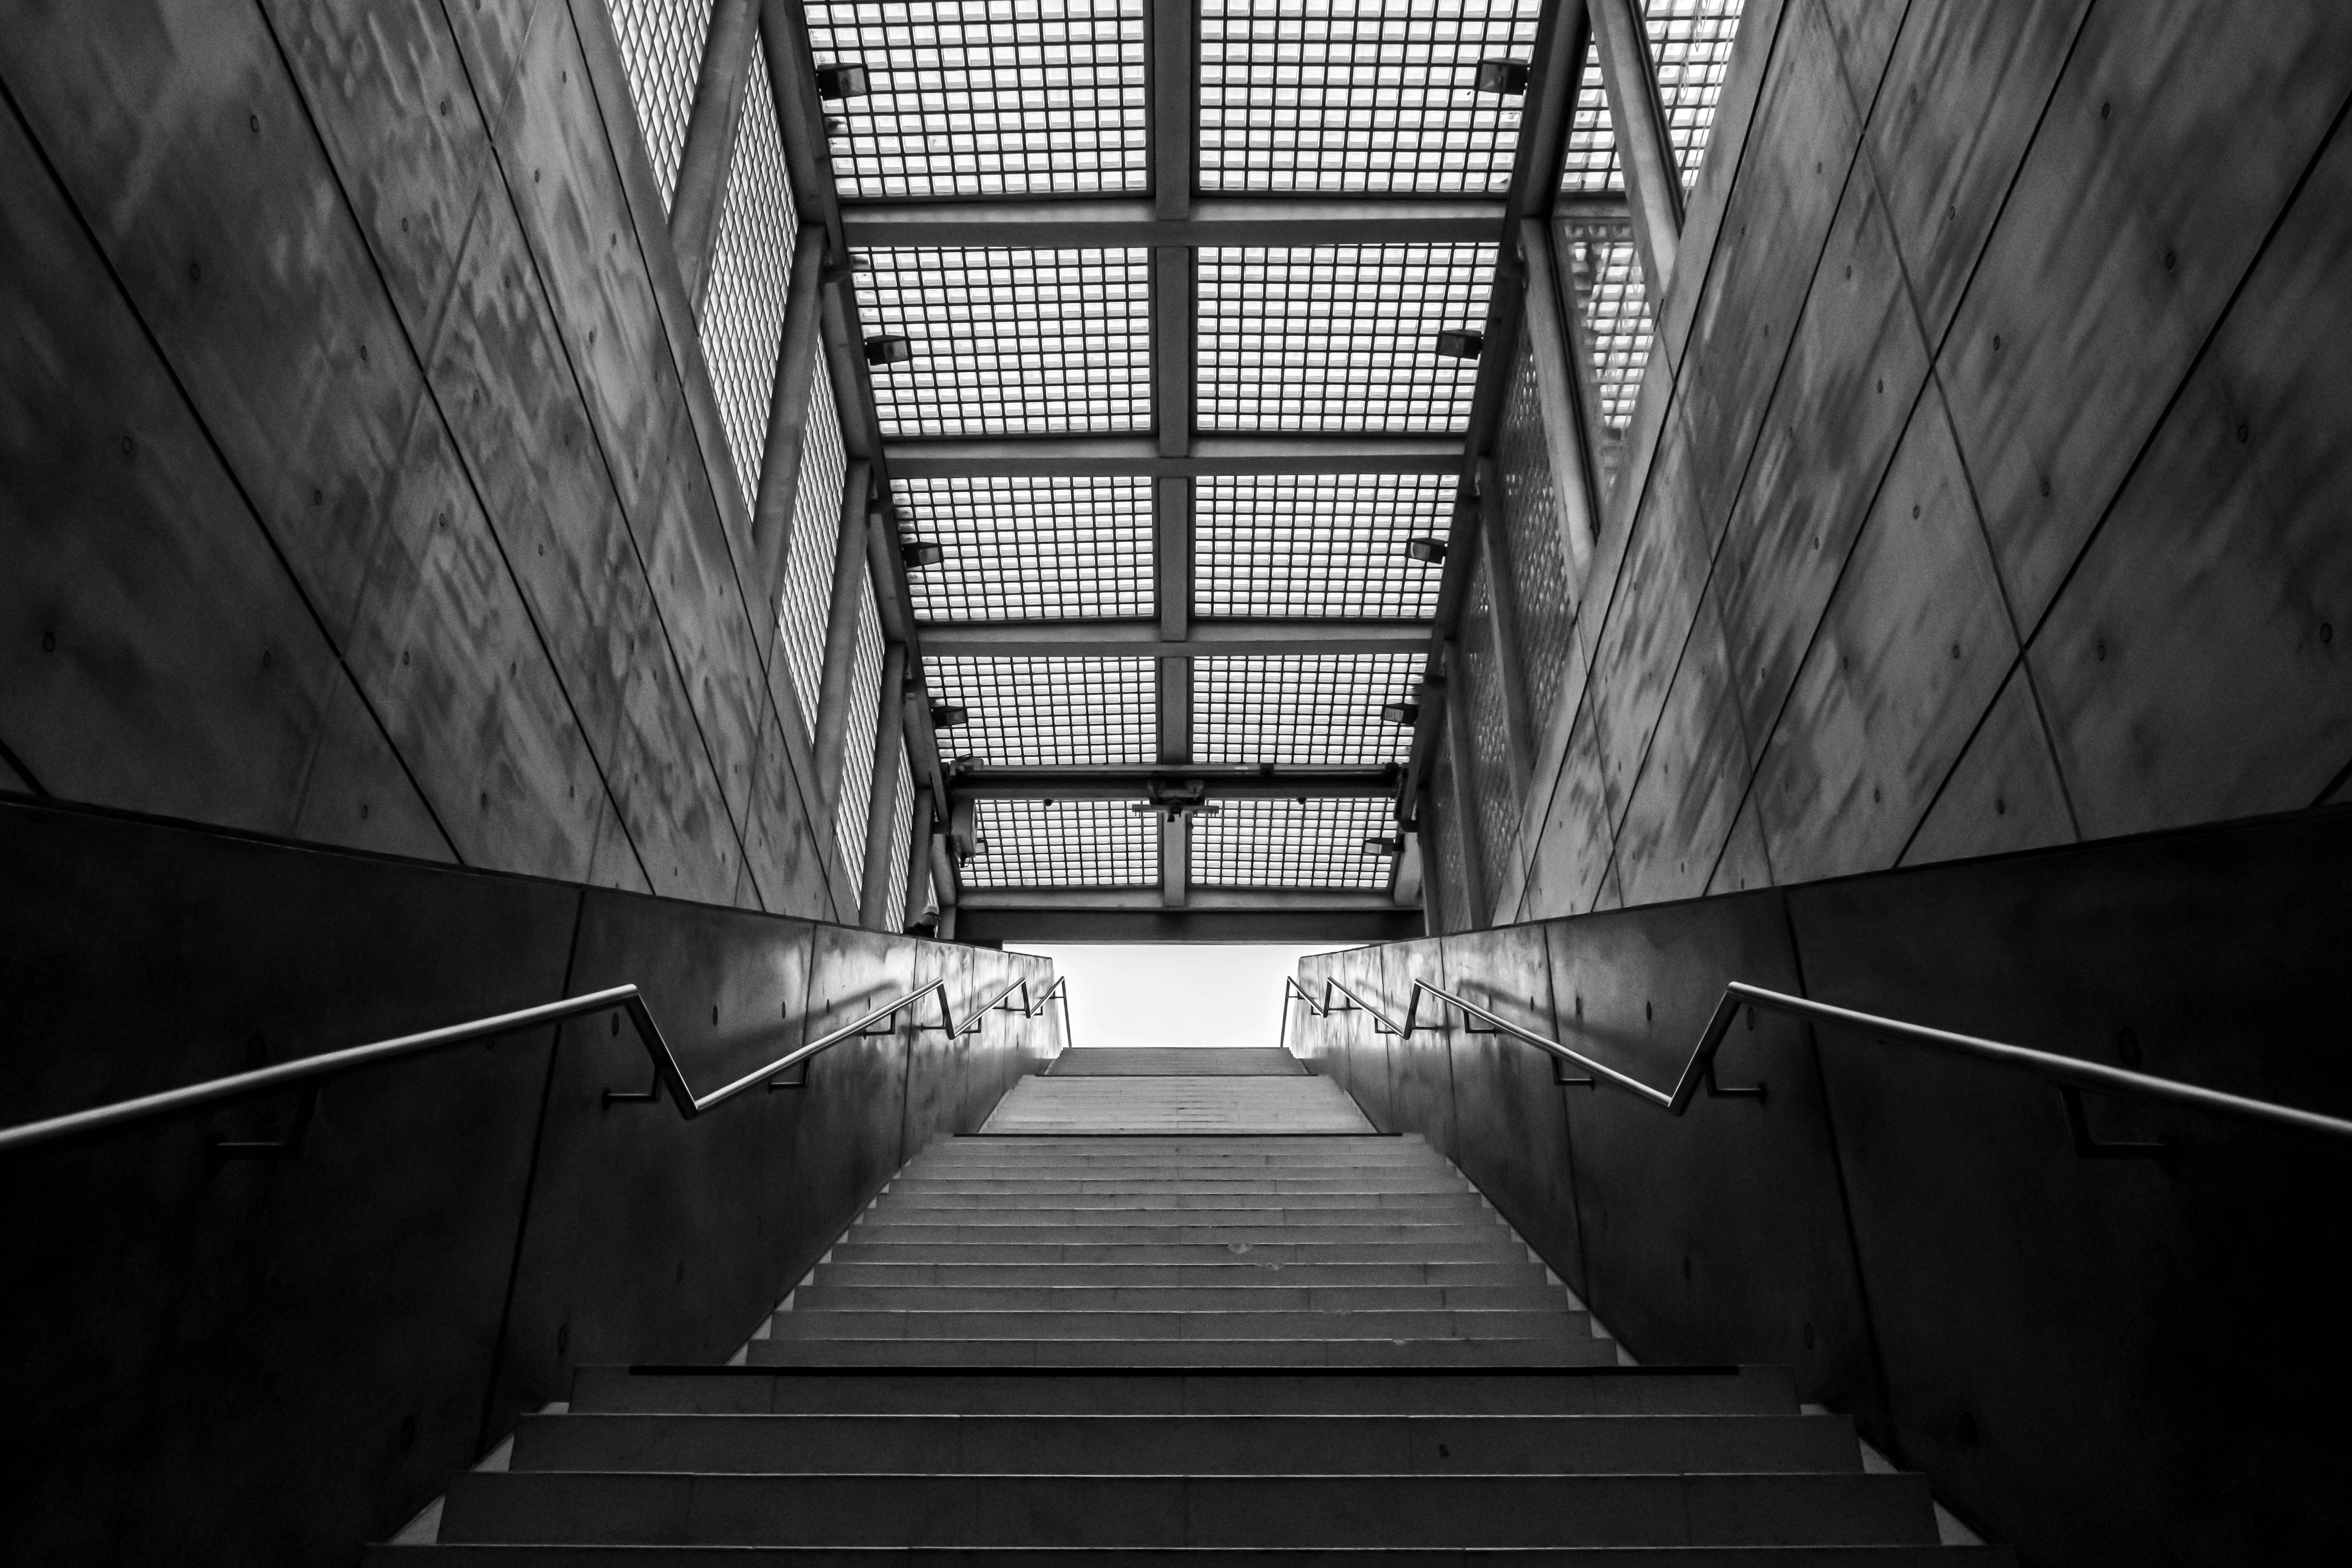 Stairway from metro station